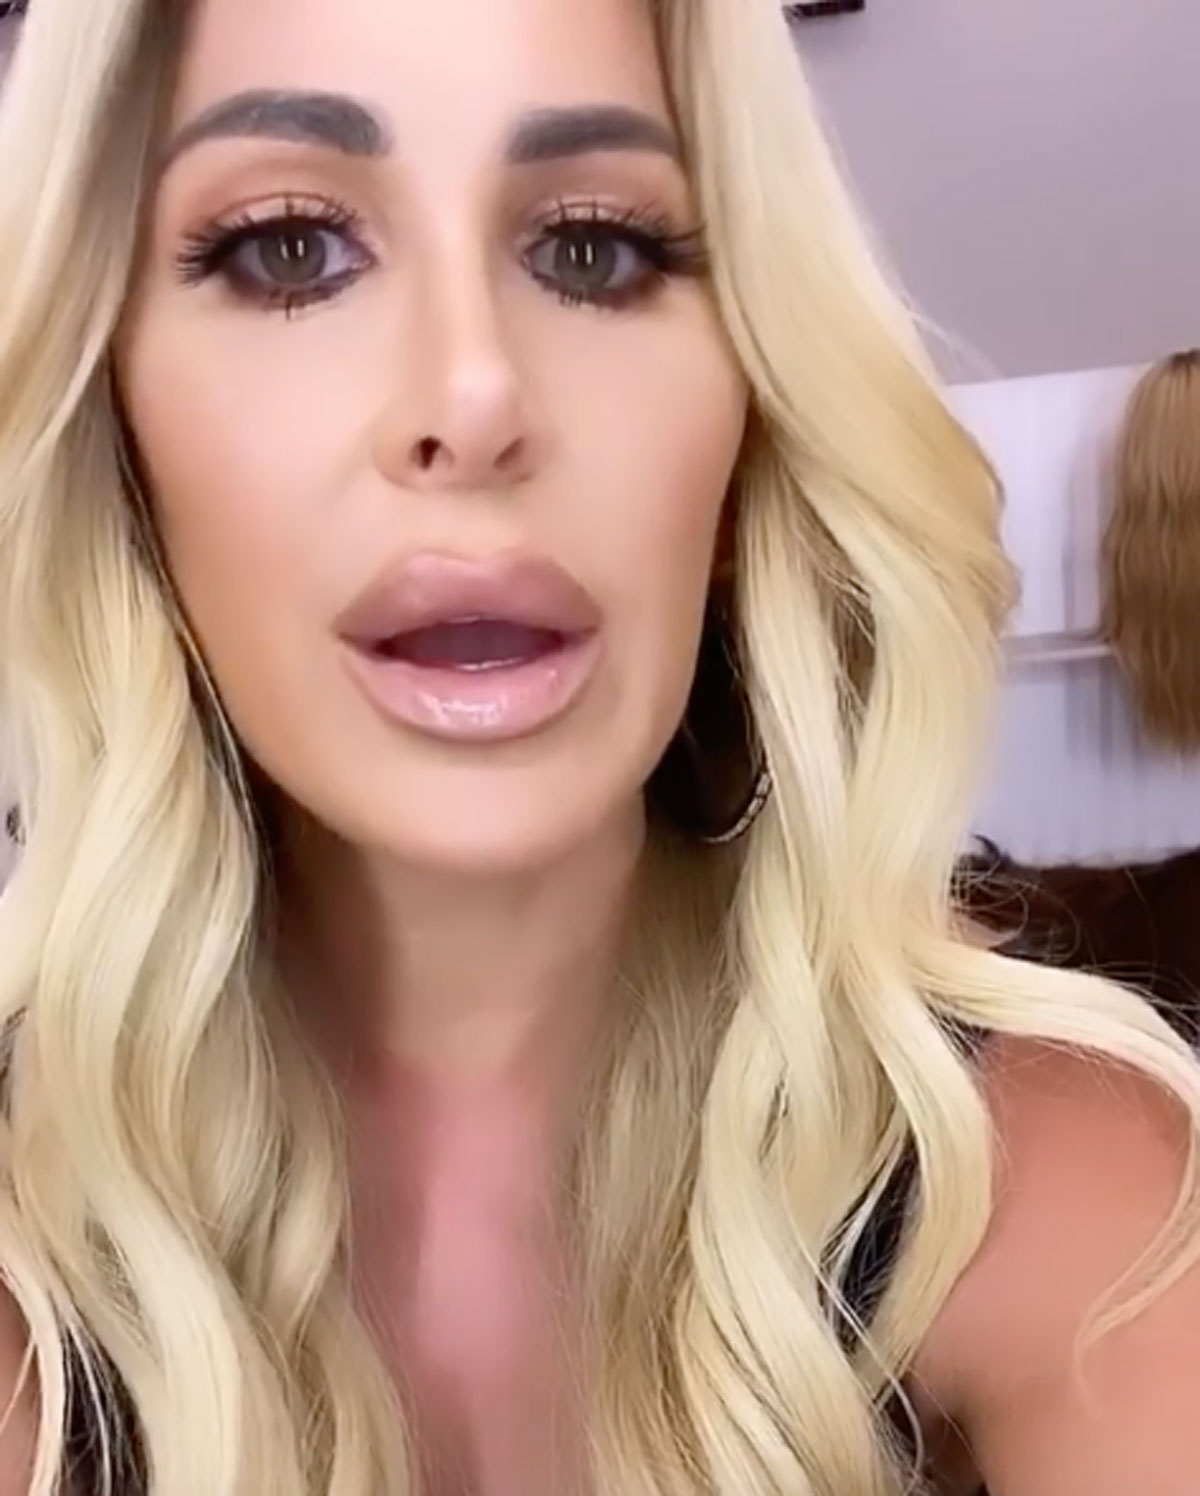 Lil Kim Upskirt Concert - Kim Zolciak Confesses To Getting Botox & Lip Fillers With Brielle Biermann  During The Pandemic! - CelebrityTalker.com